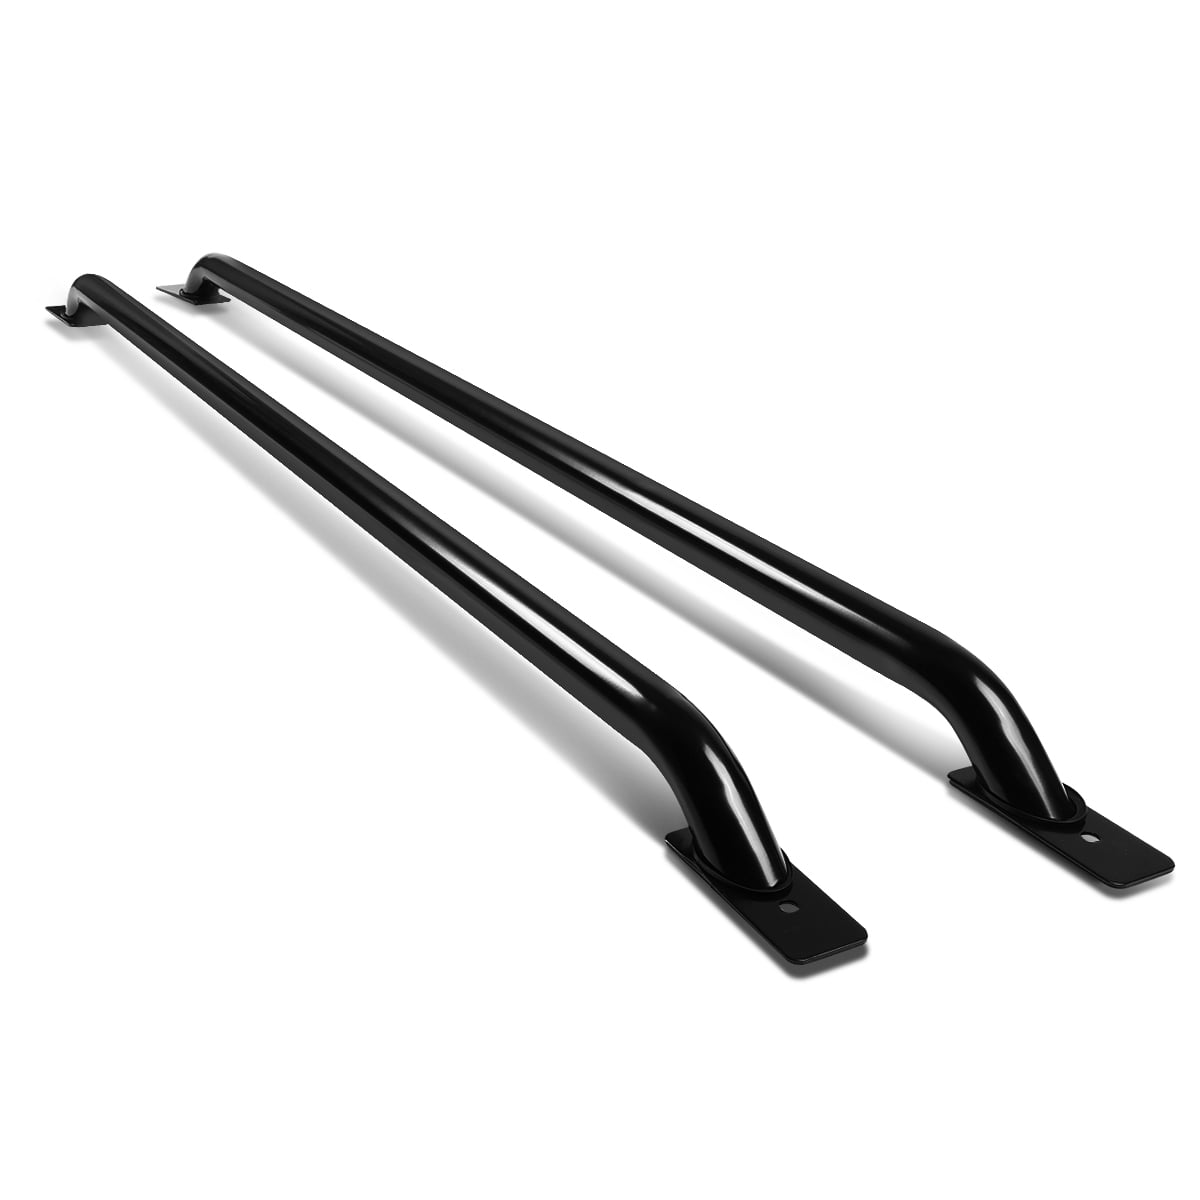 DNA MOTORING RAIL-005-SS Pair of Truck Rails for 99-00 Chevy GMC Dodge 1500 2500 3500 8ft Bed